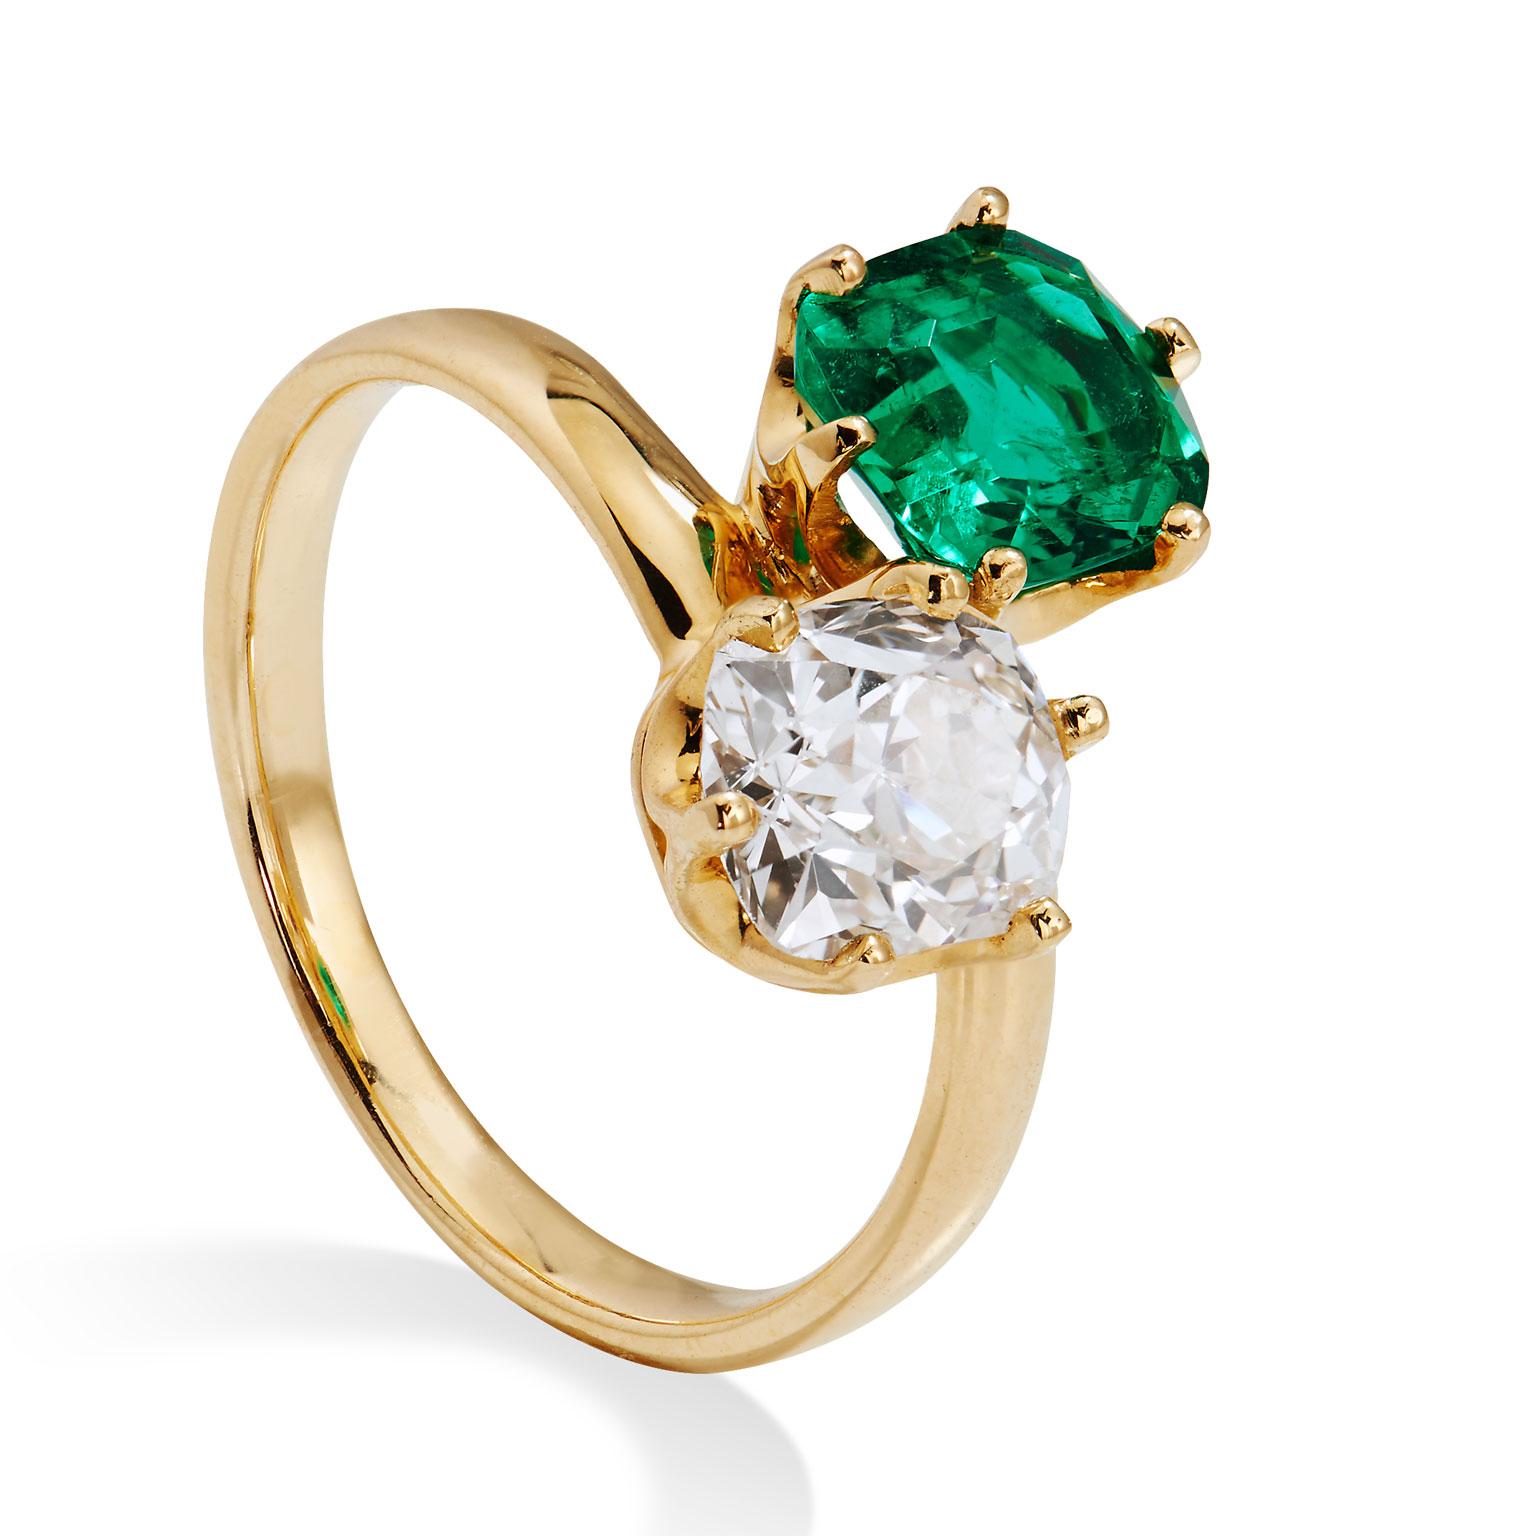 Be blown away by this extremely rare circa 1920s all original Tiffany & Co. Colombian no treatment emerald and diamond ring. With a six-prong bypass-style shank, 1.19 carat  of Colombian emerald (GIA# 2181558435) is set below as a 1.27 carat diamond